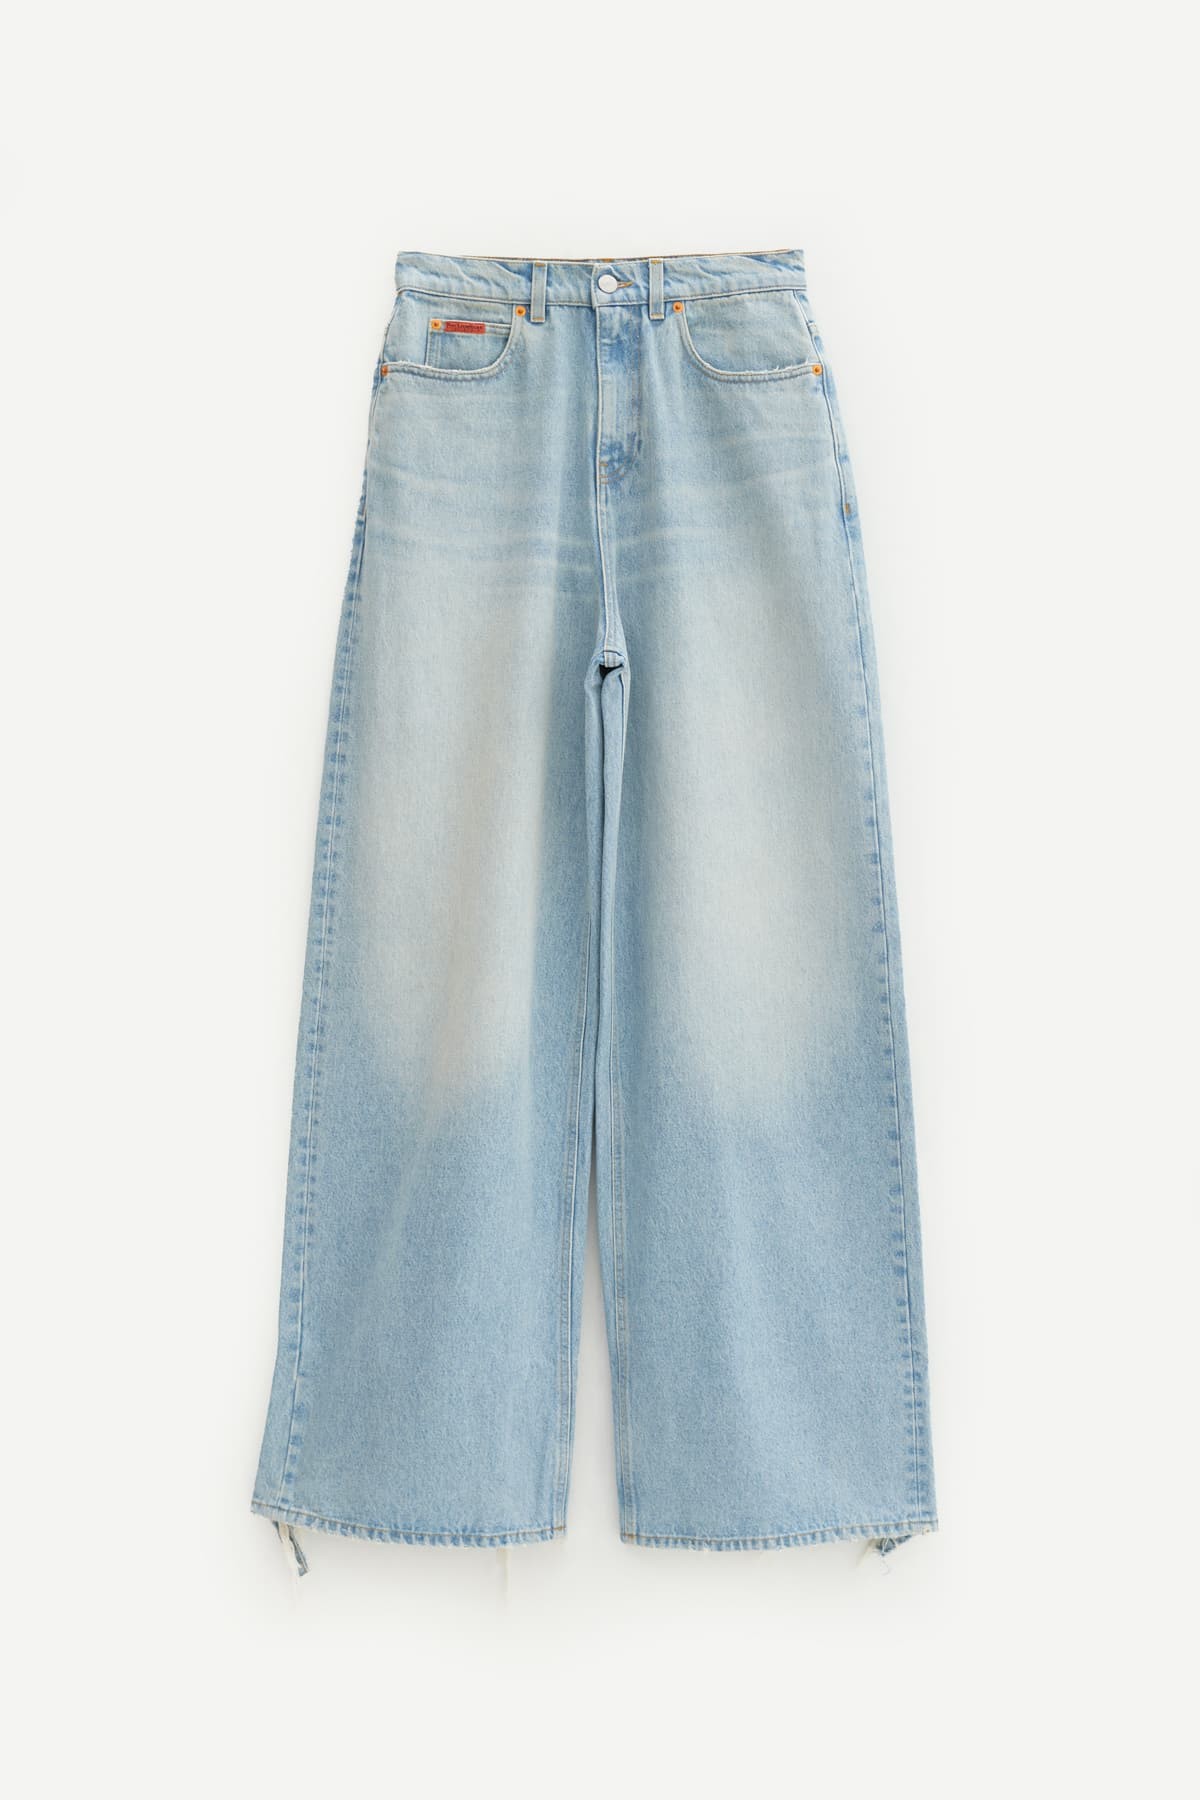 MARTINE ROSE BLEACHED WASH EXTENDED WIDE LEG JEANS IAMNUE